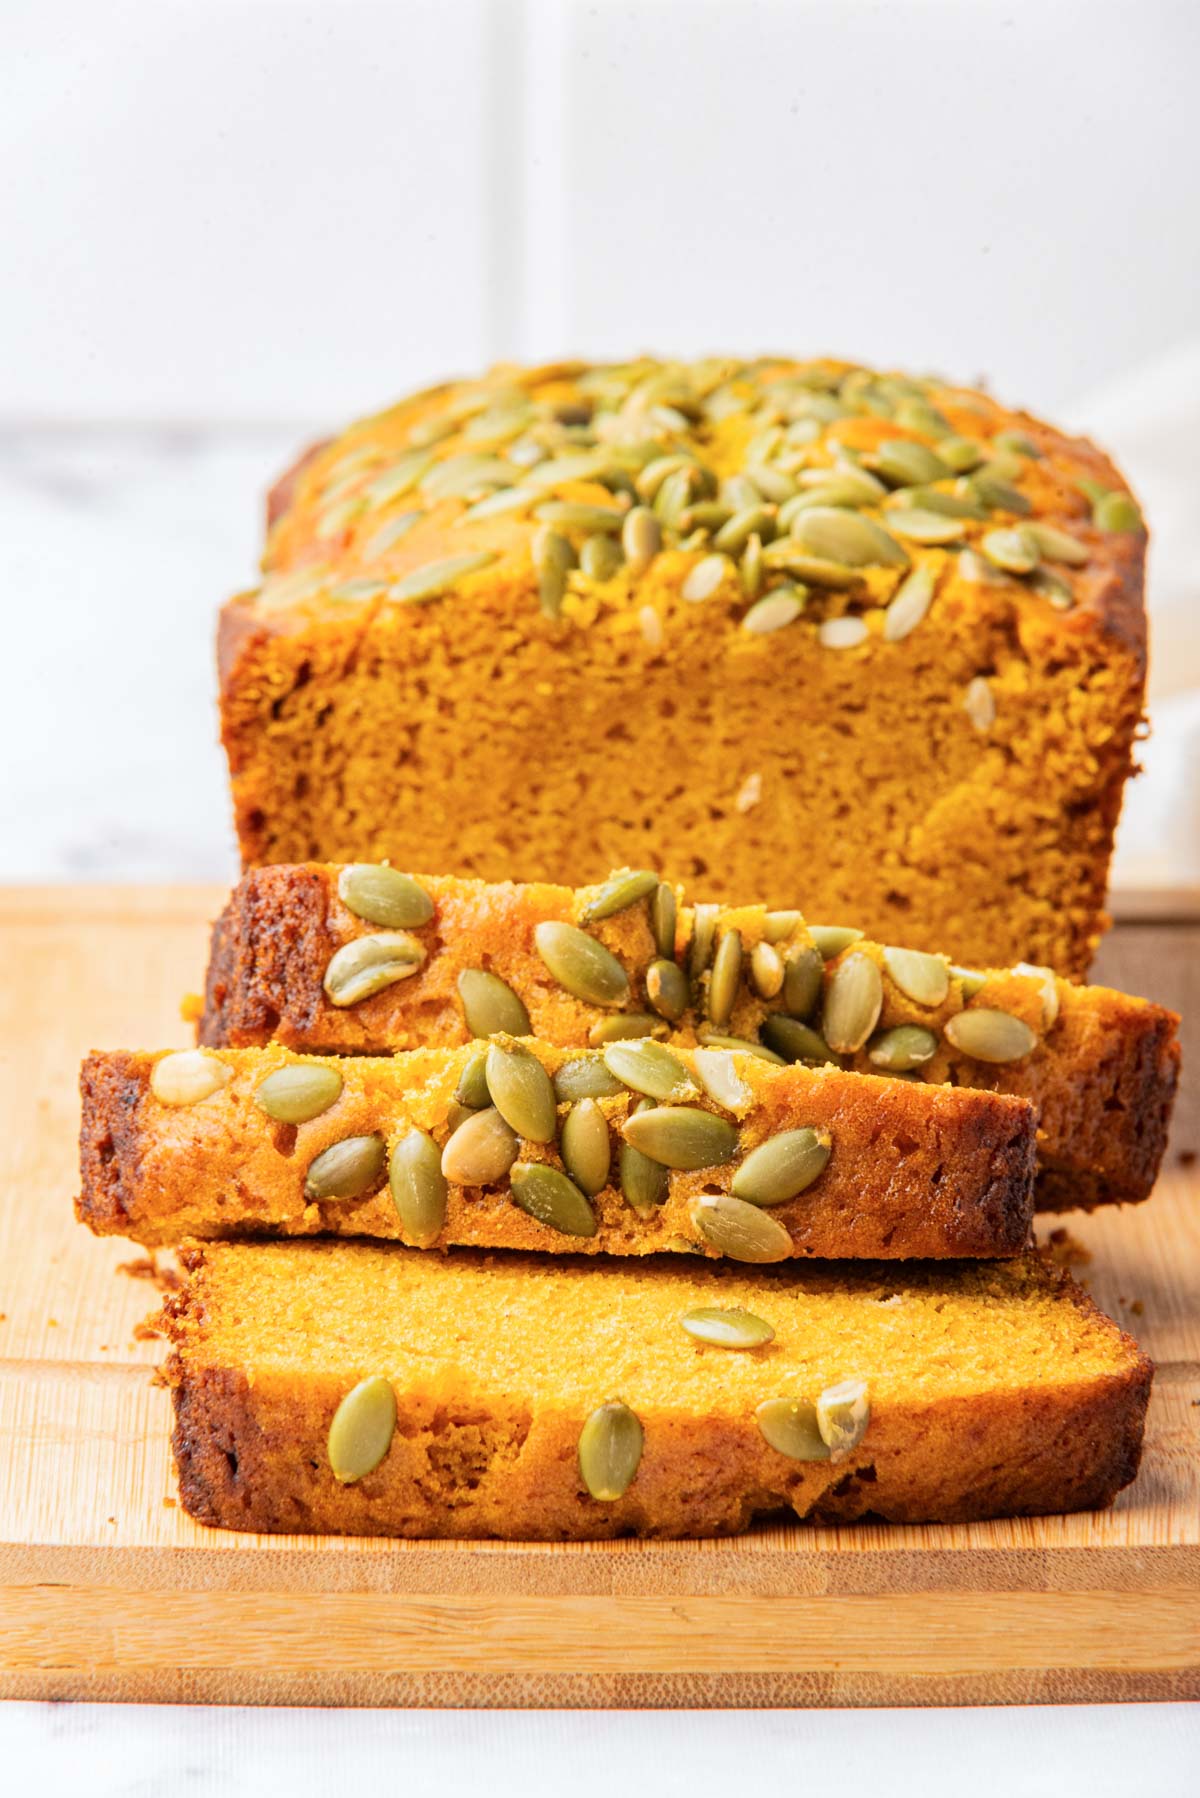 A loaf of pumpkin bread with a few slices cut and arranged in front, showcasing the interior texture and pumpkin seed topping.